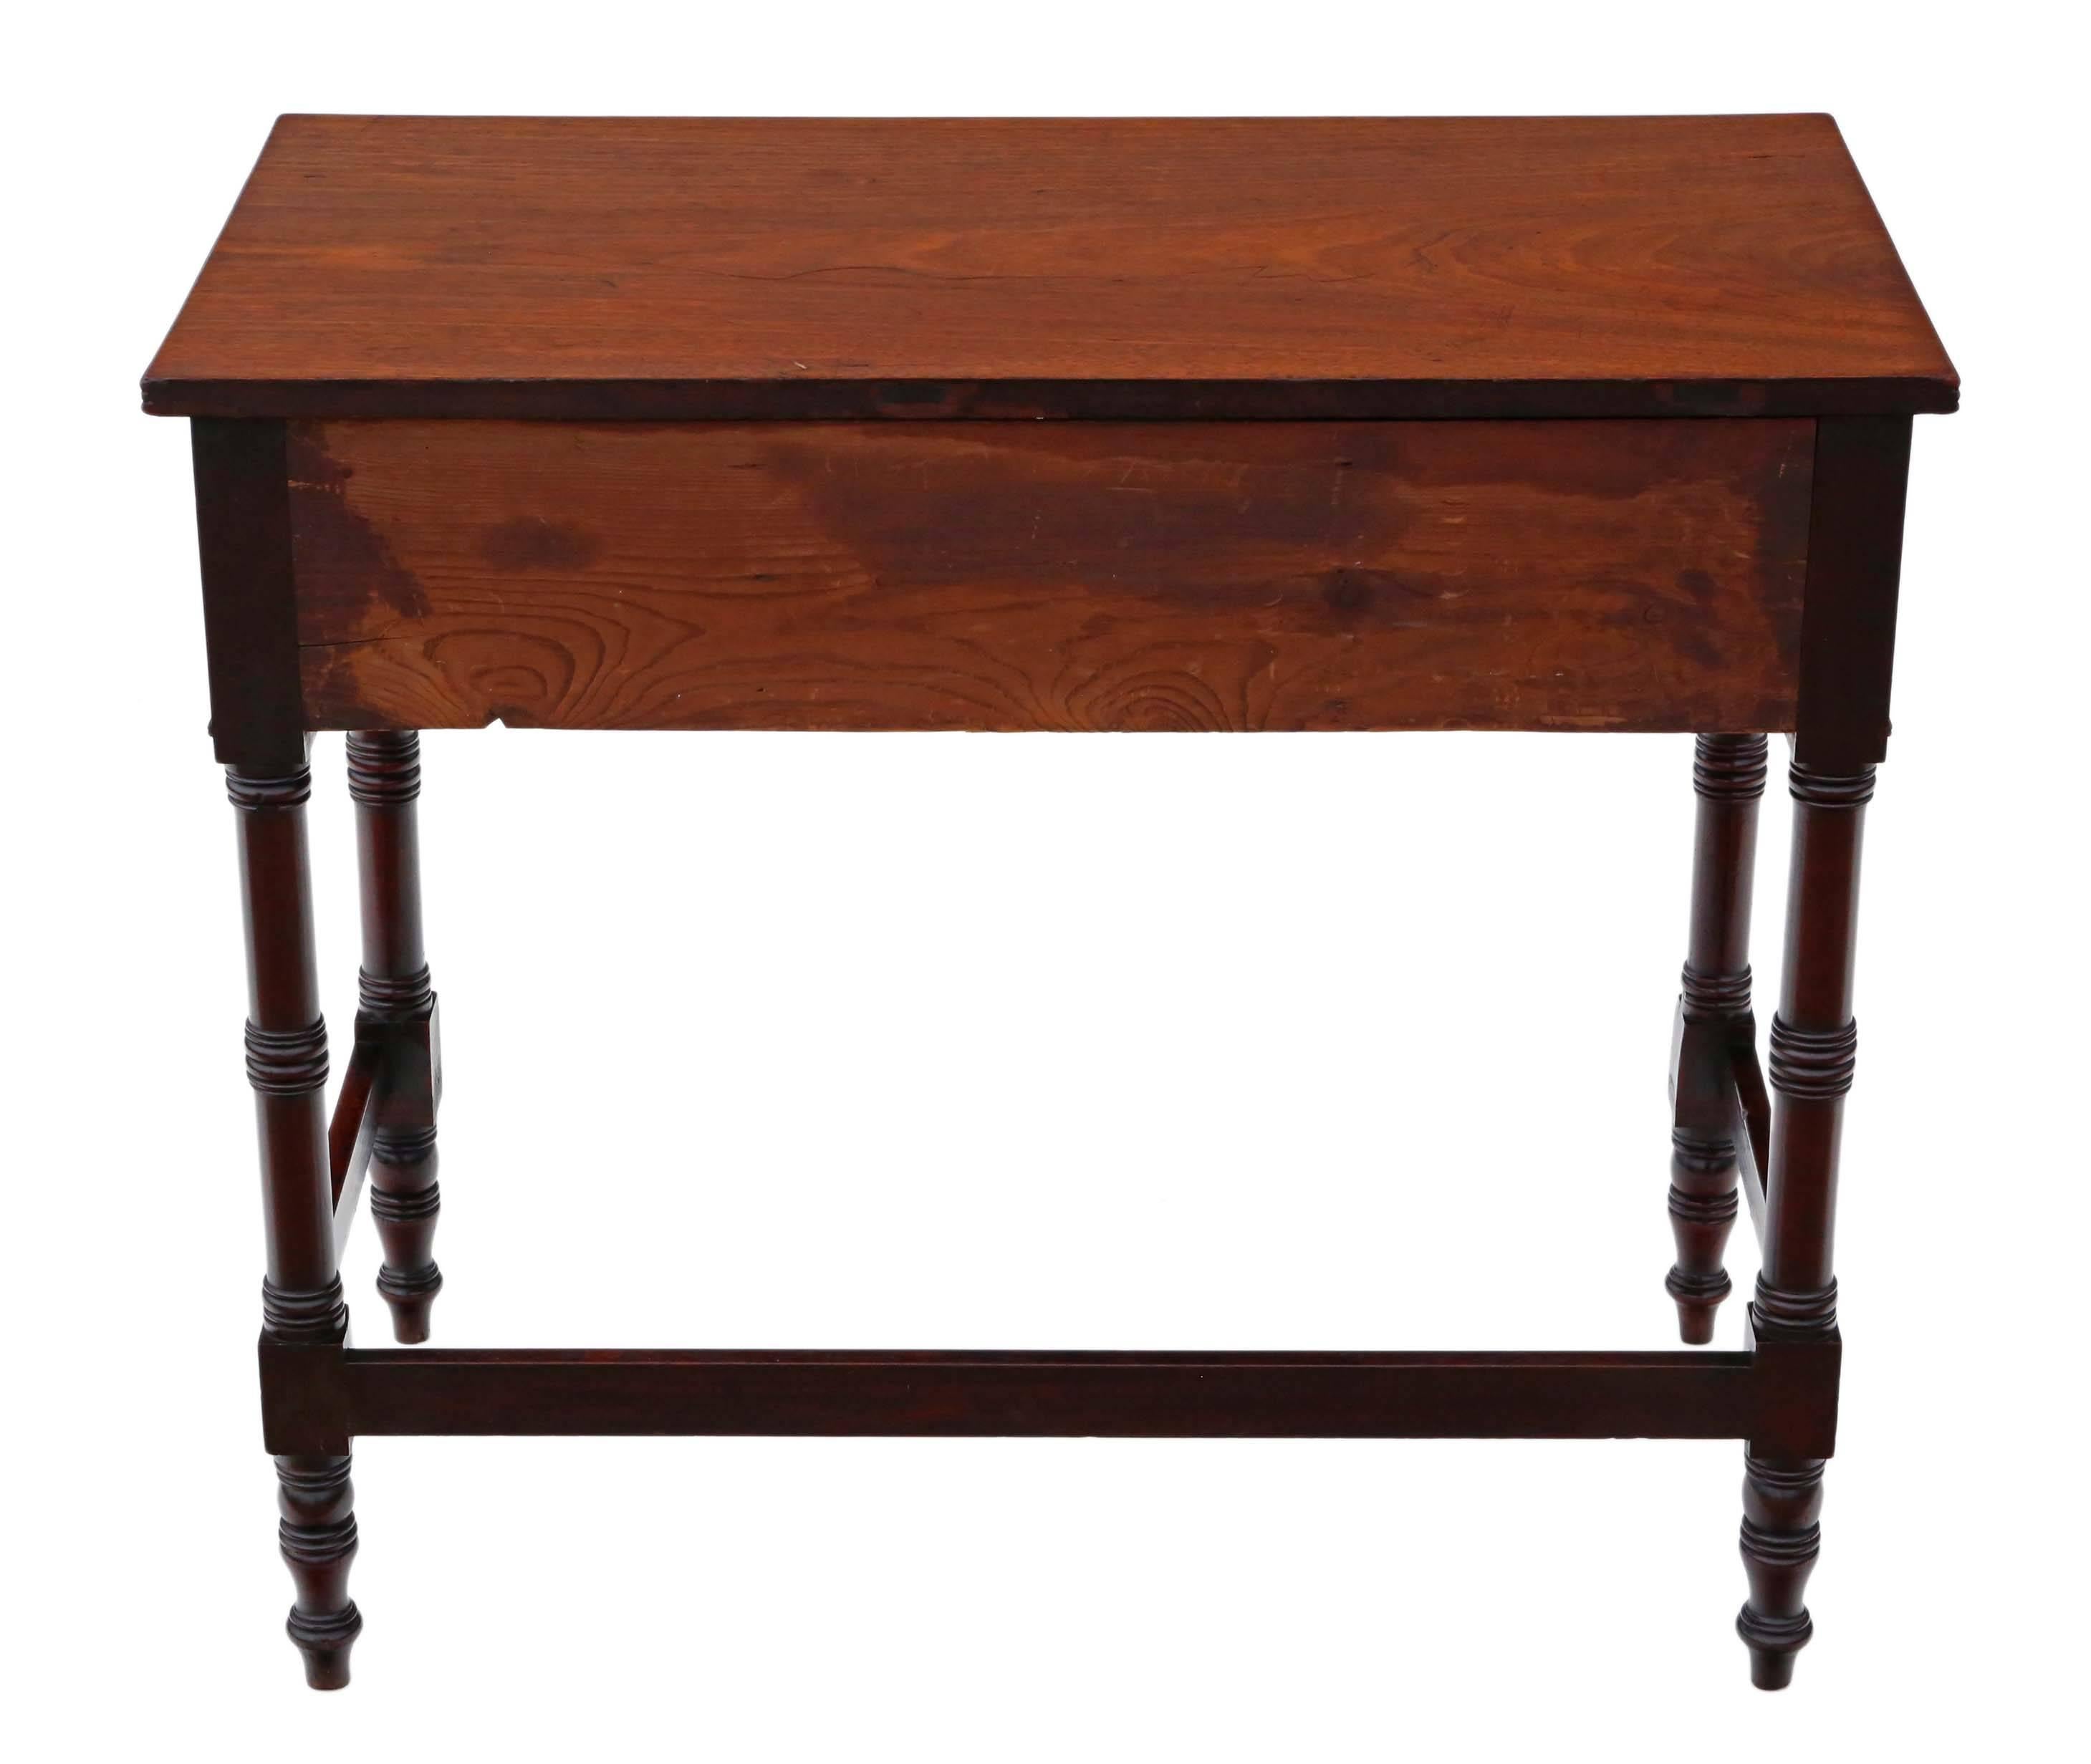 Antique Regency circa 1825 and Later Mahogany Desk or Writing Table For Sale 2